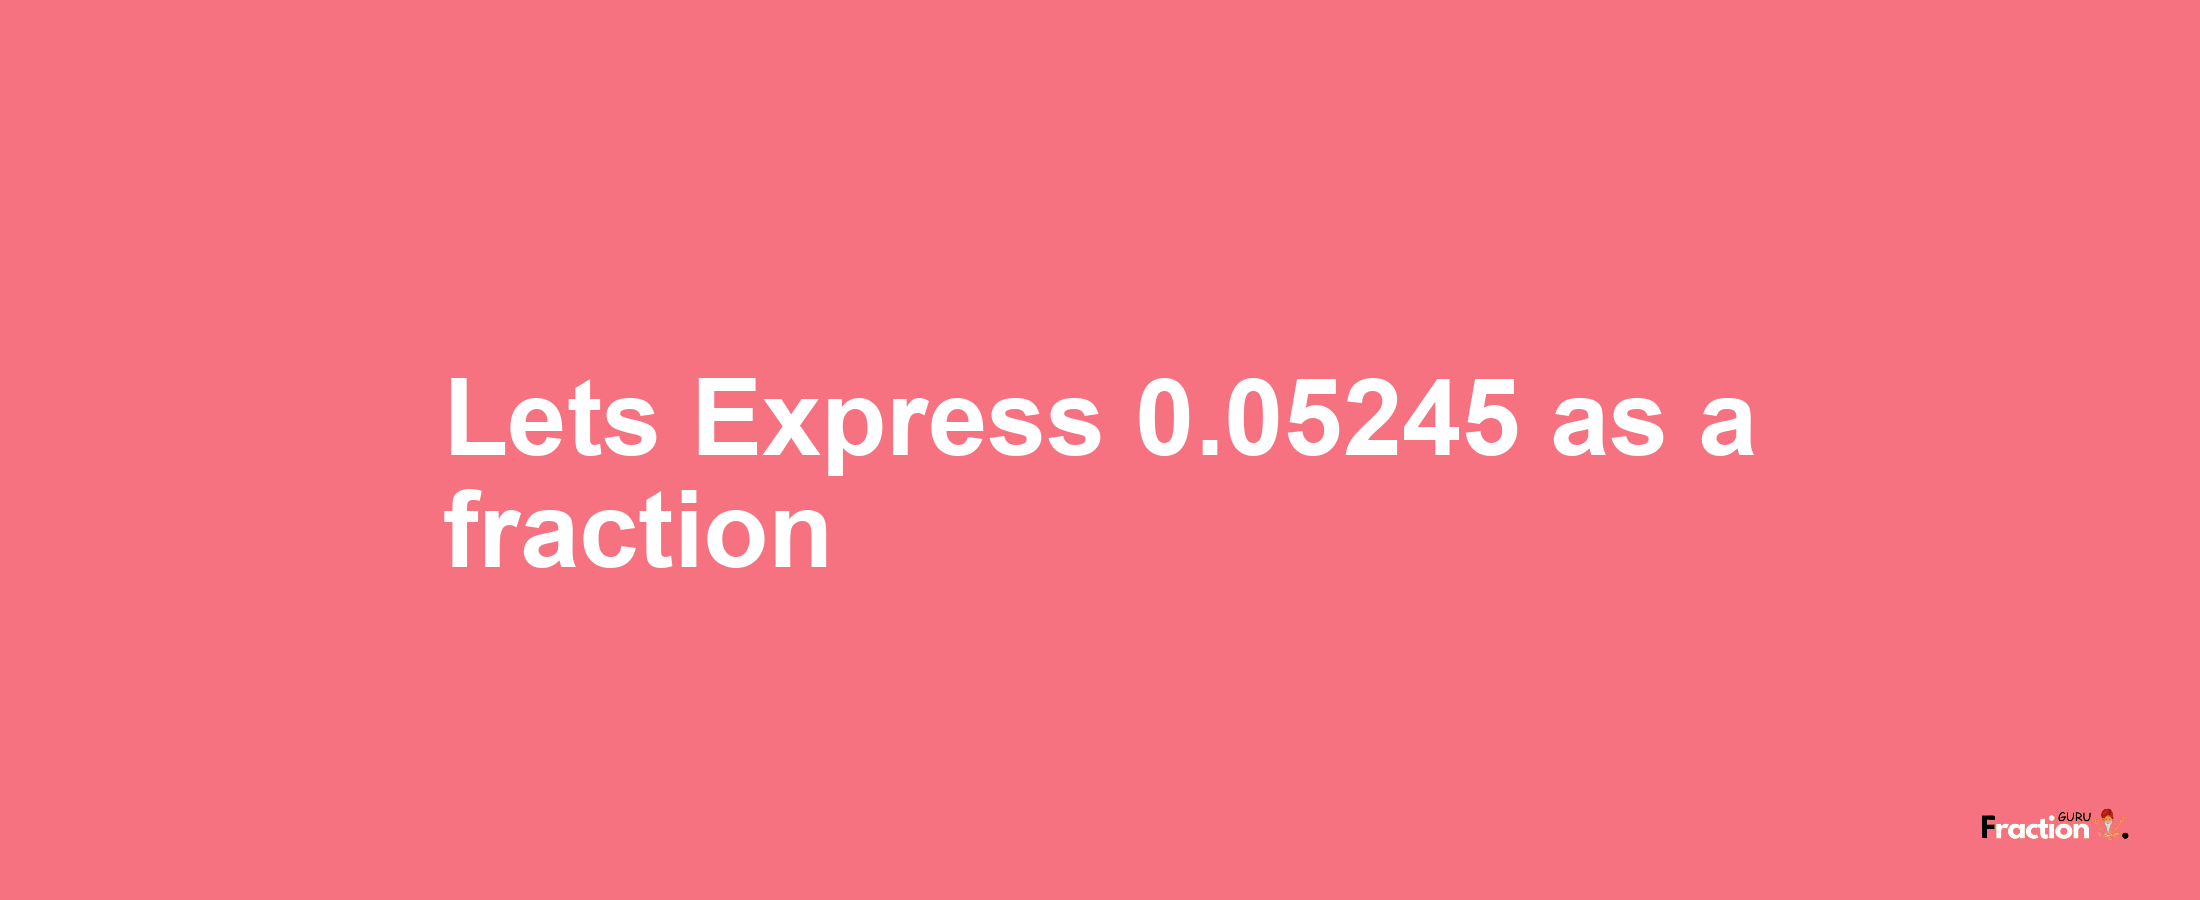 Lets Express 0.05245 as afraction